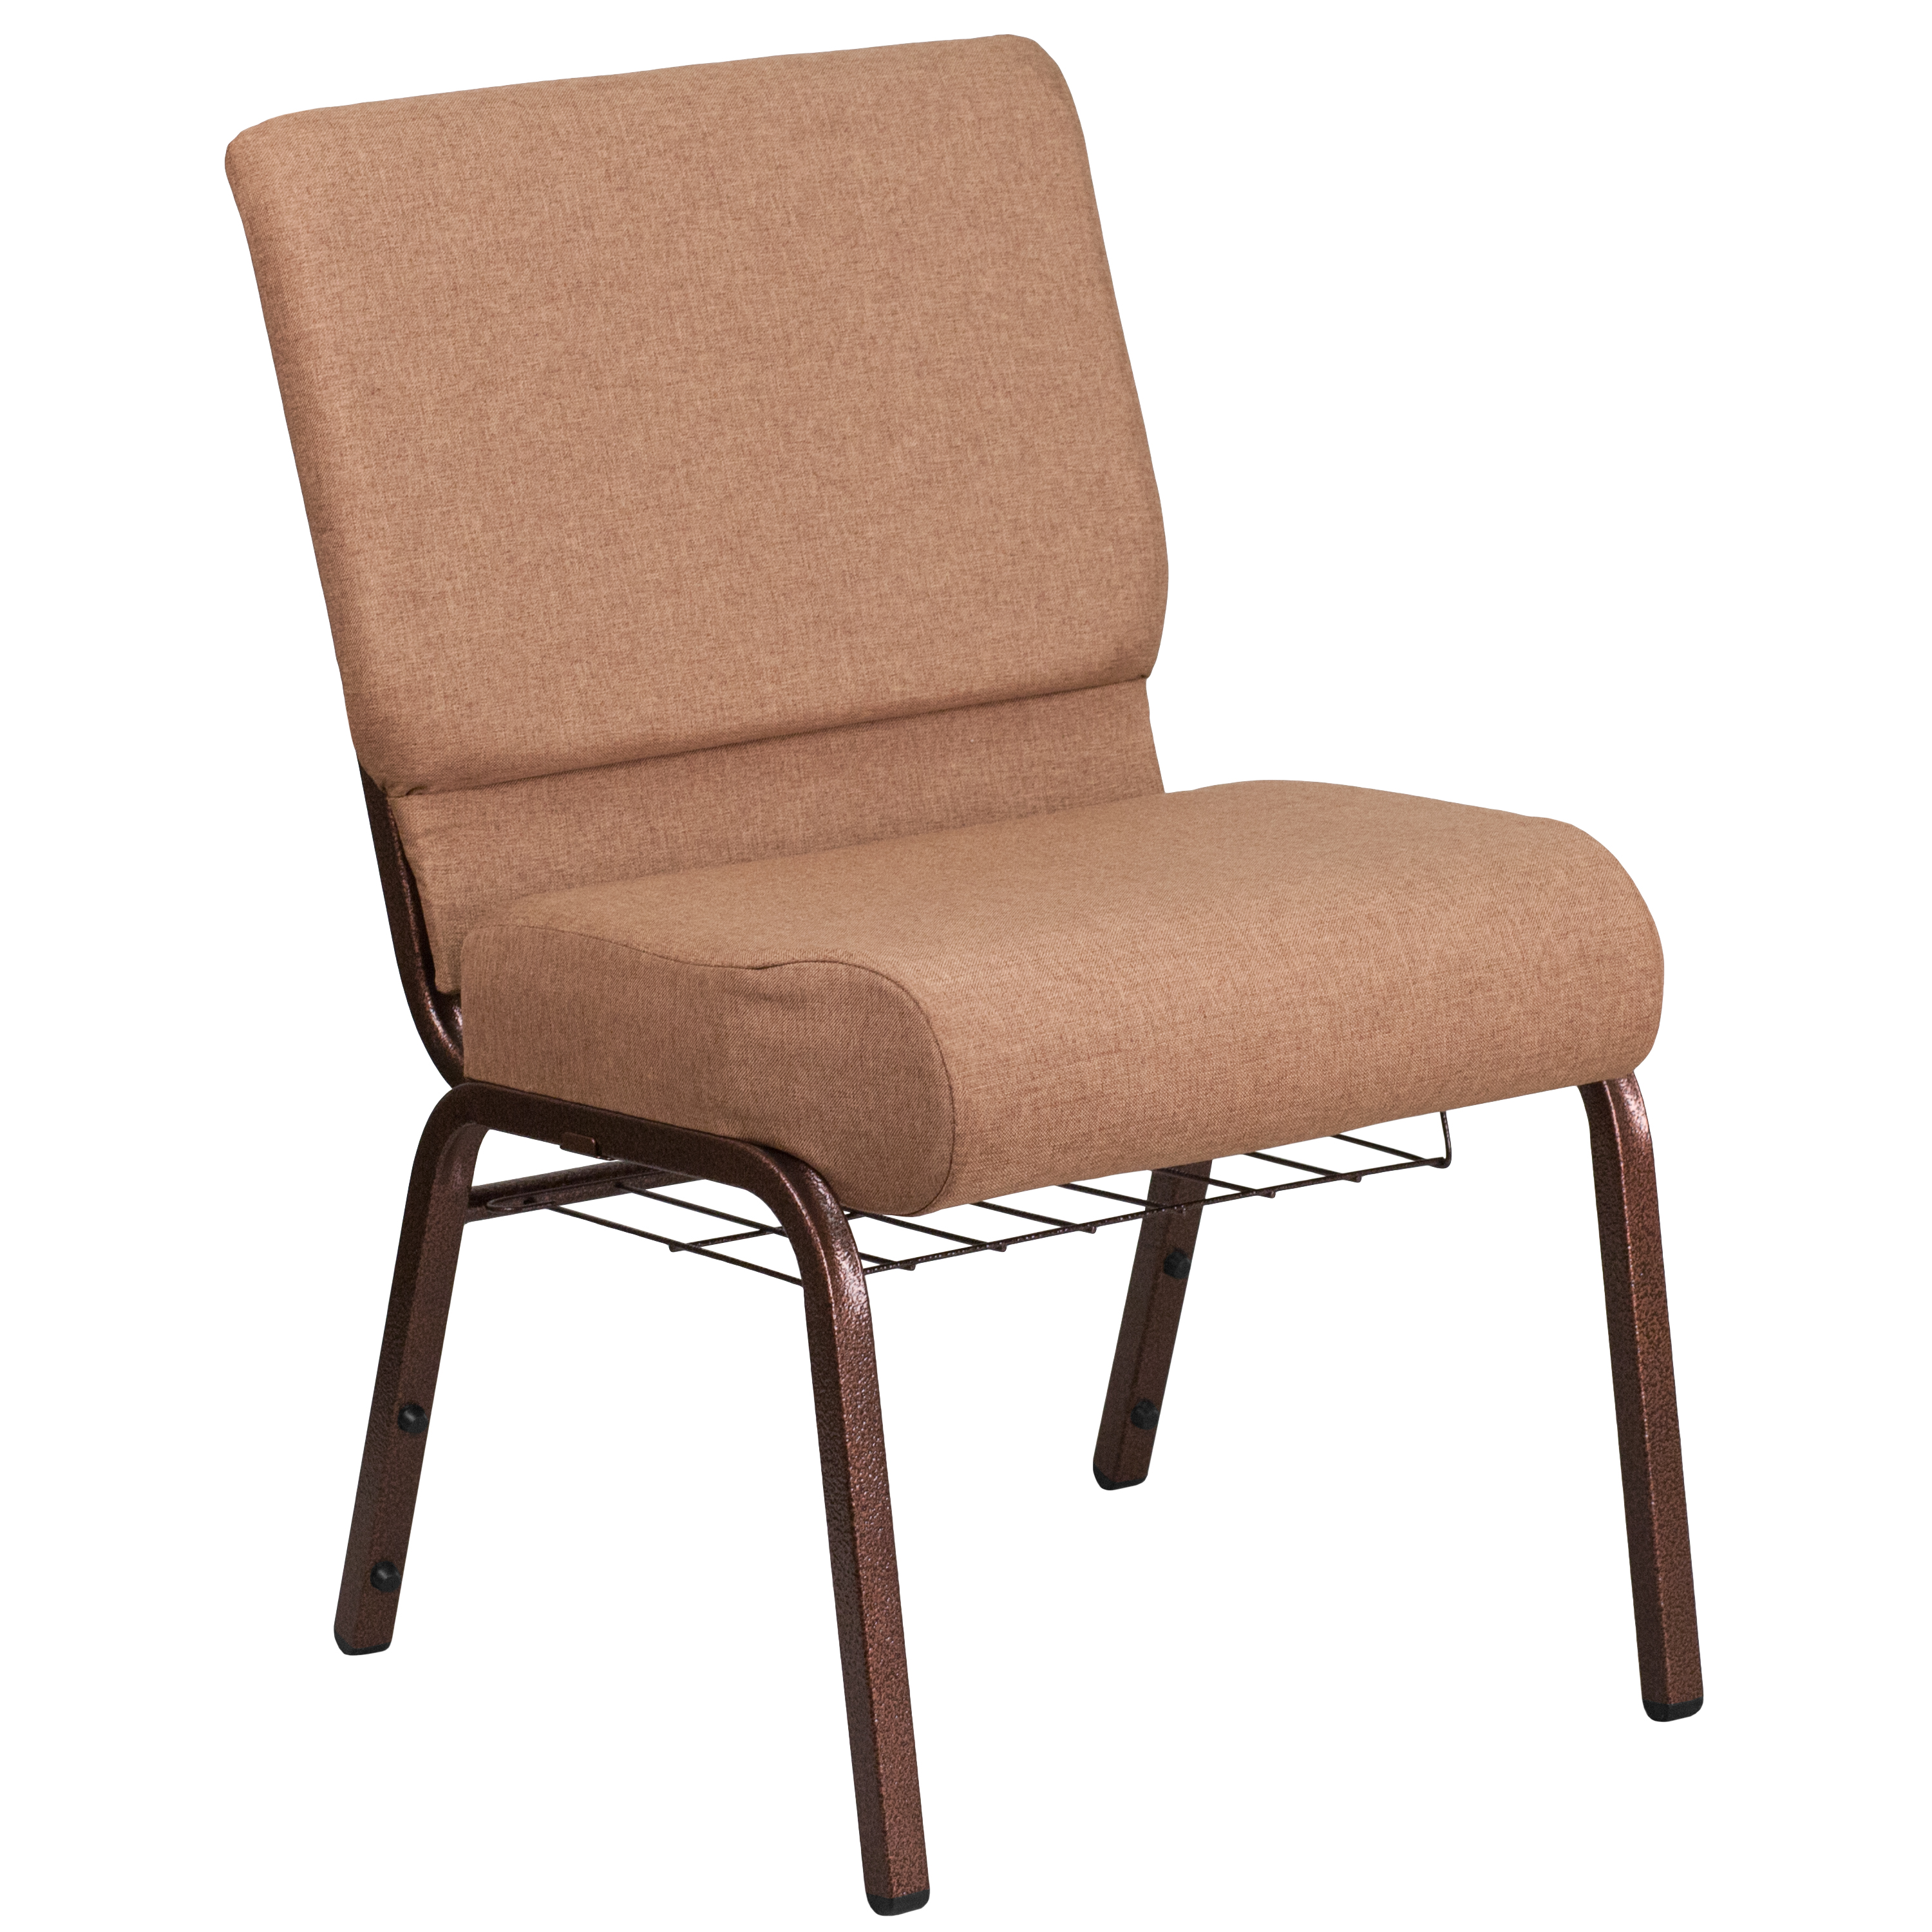 Flash Furniture HERCULES Series 21''W Church Chair in Caramel Fabric with Cup Book Rack - Copper Vein Frame - image 2 of 11